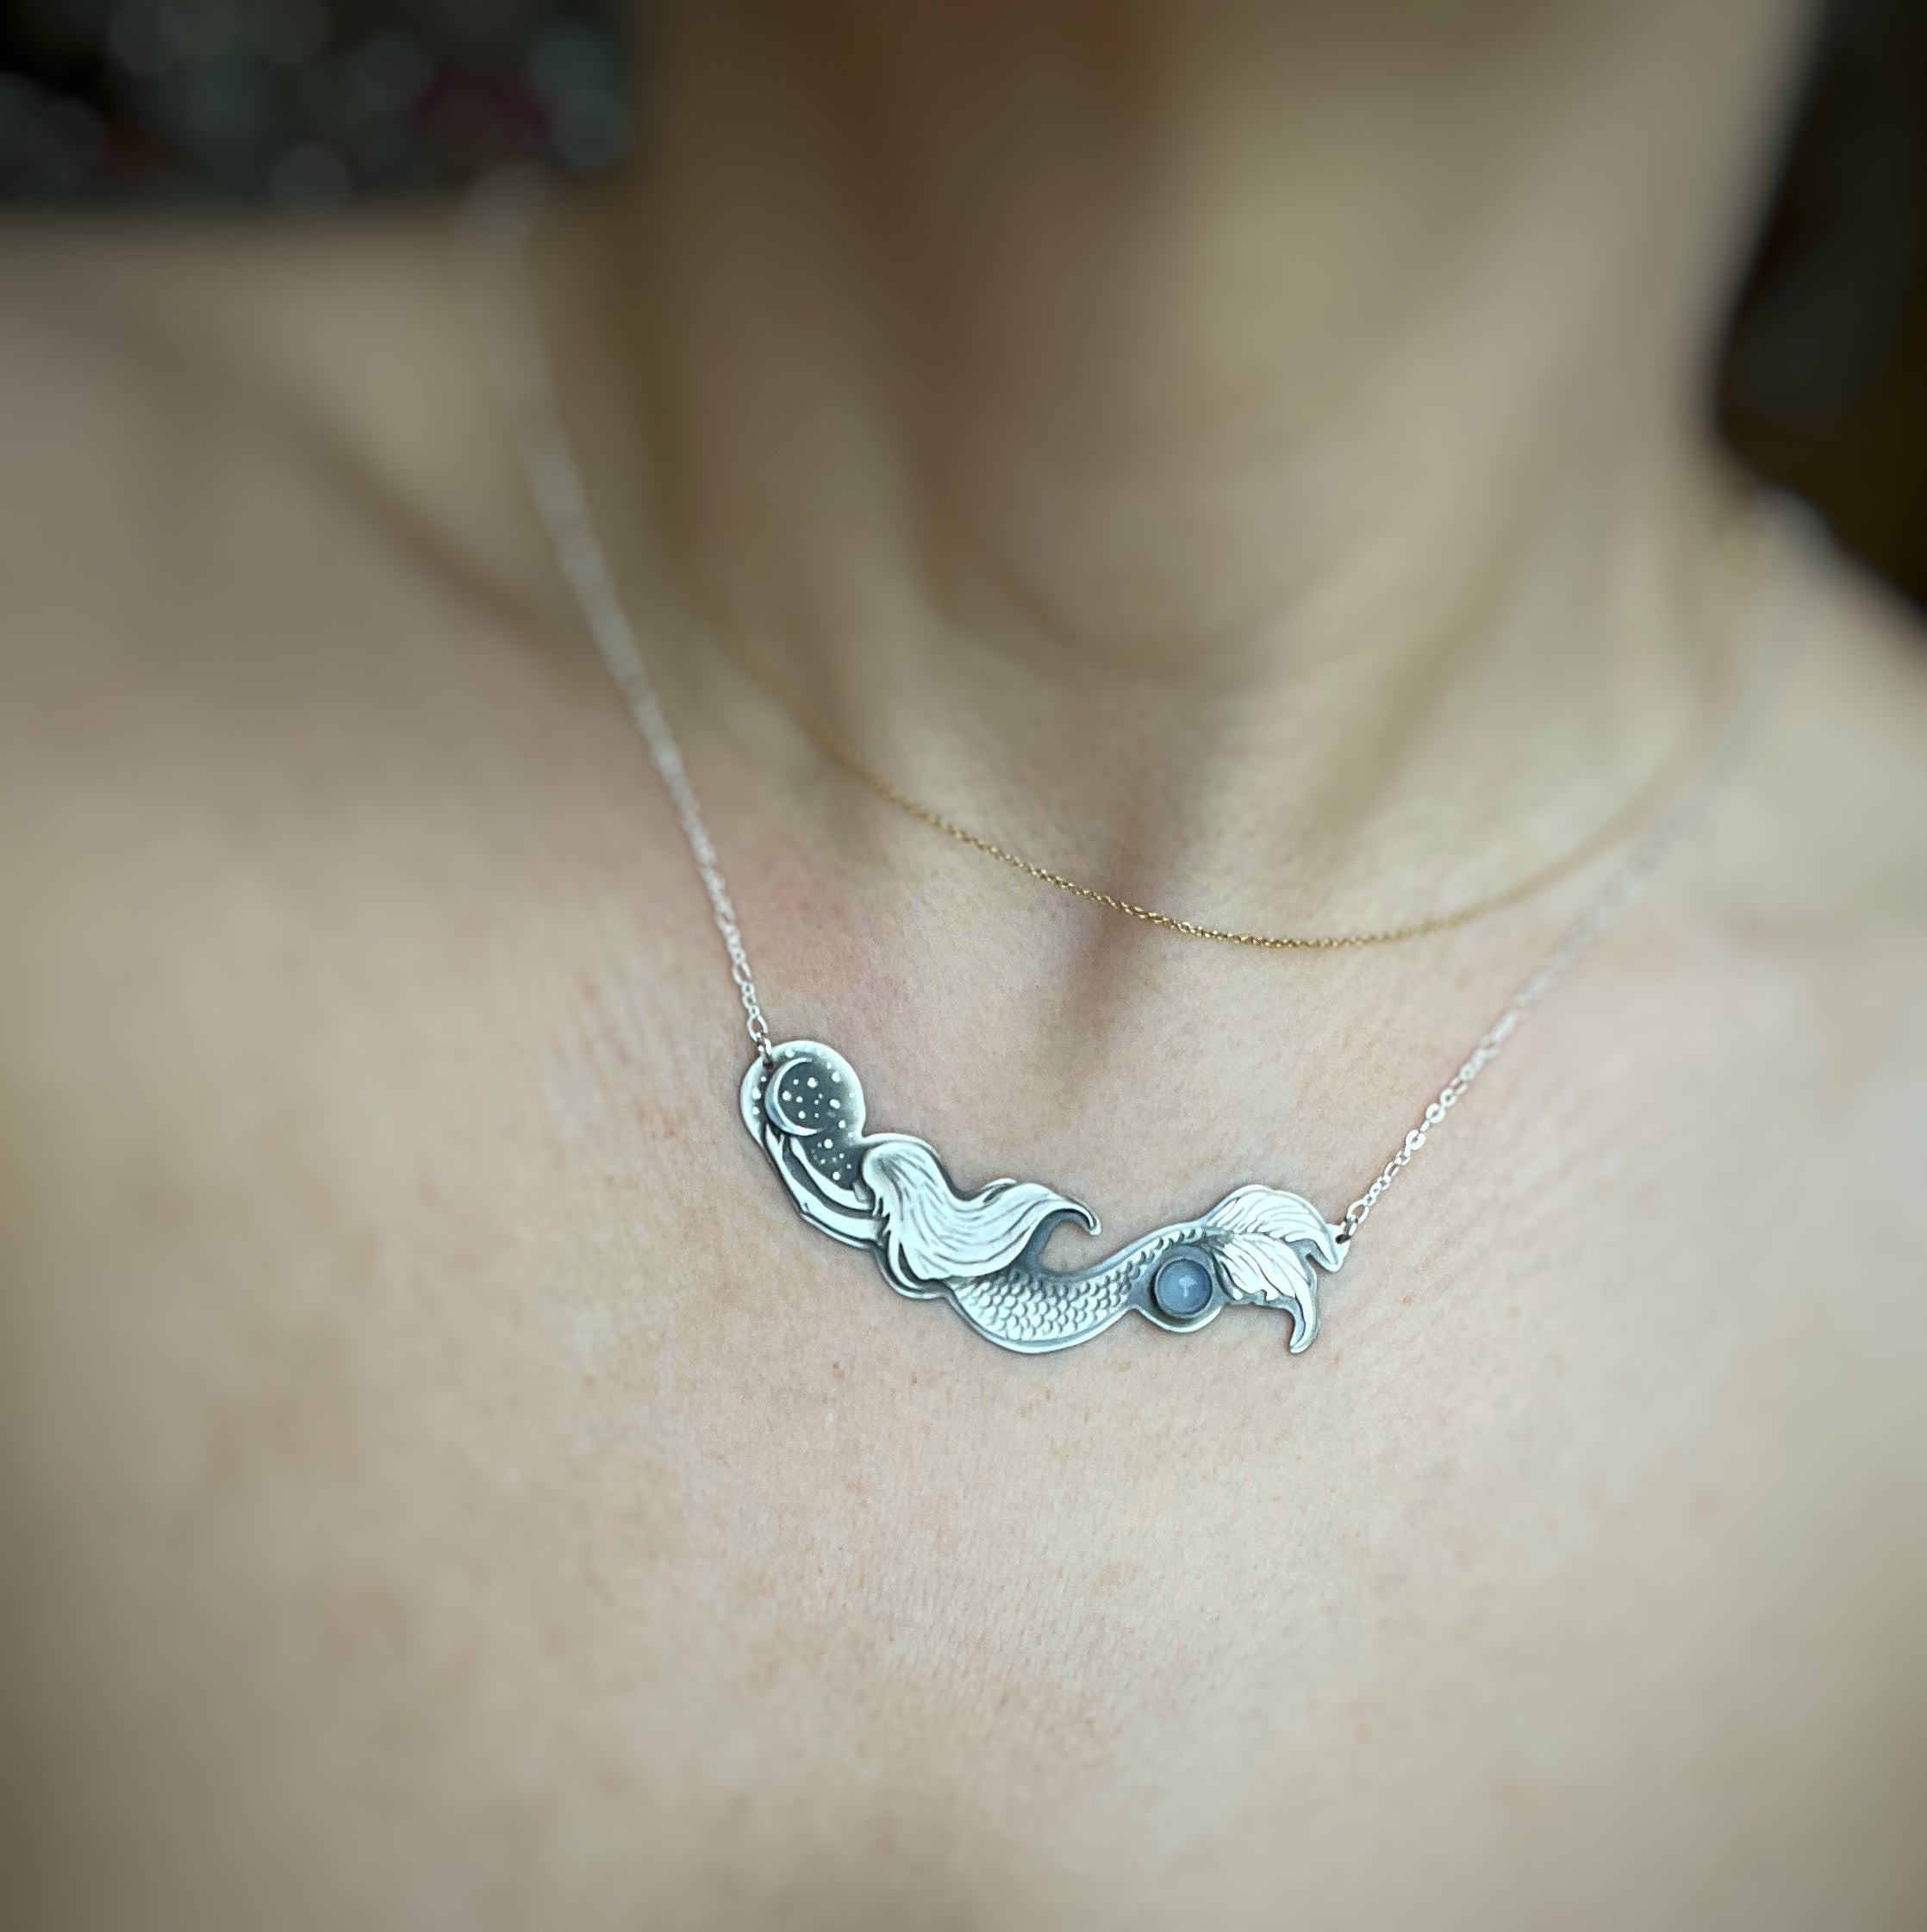 Angel of the Sea Necklace - Mermaid Necklace